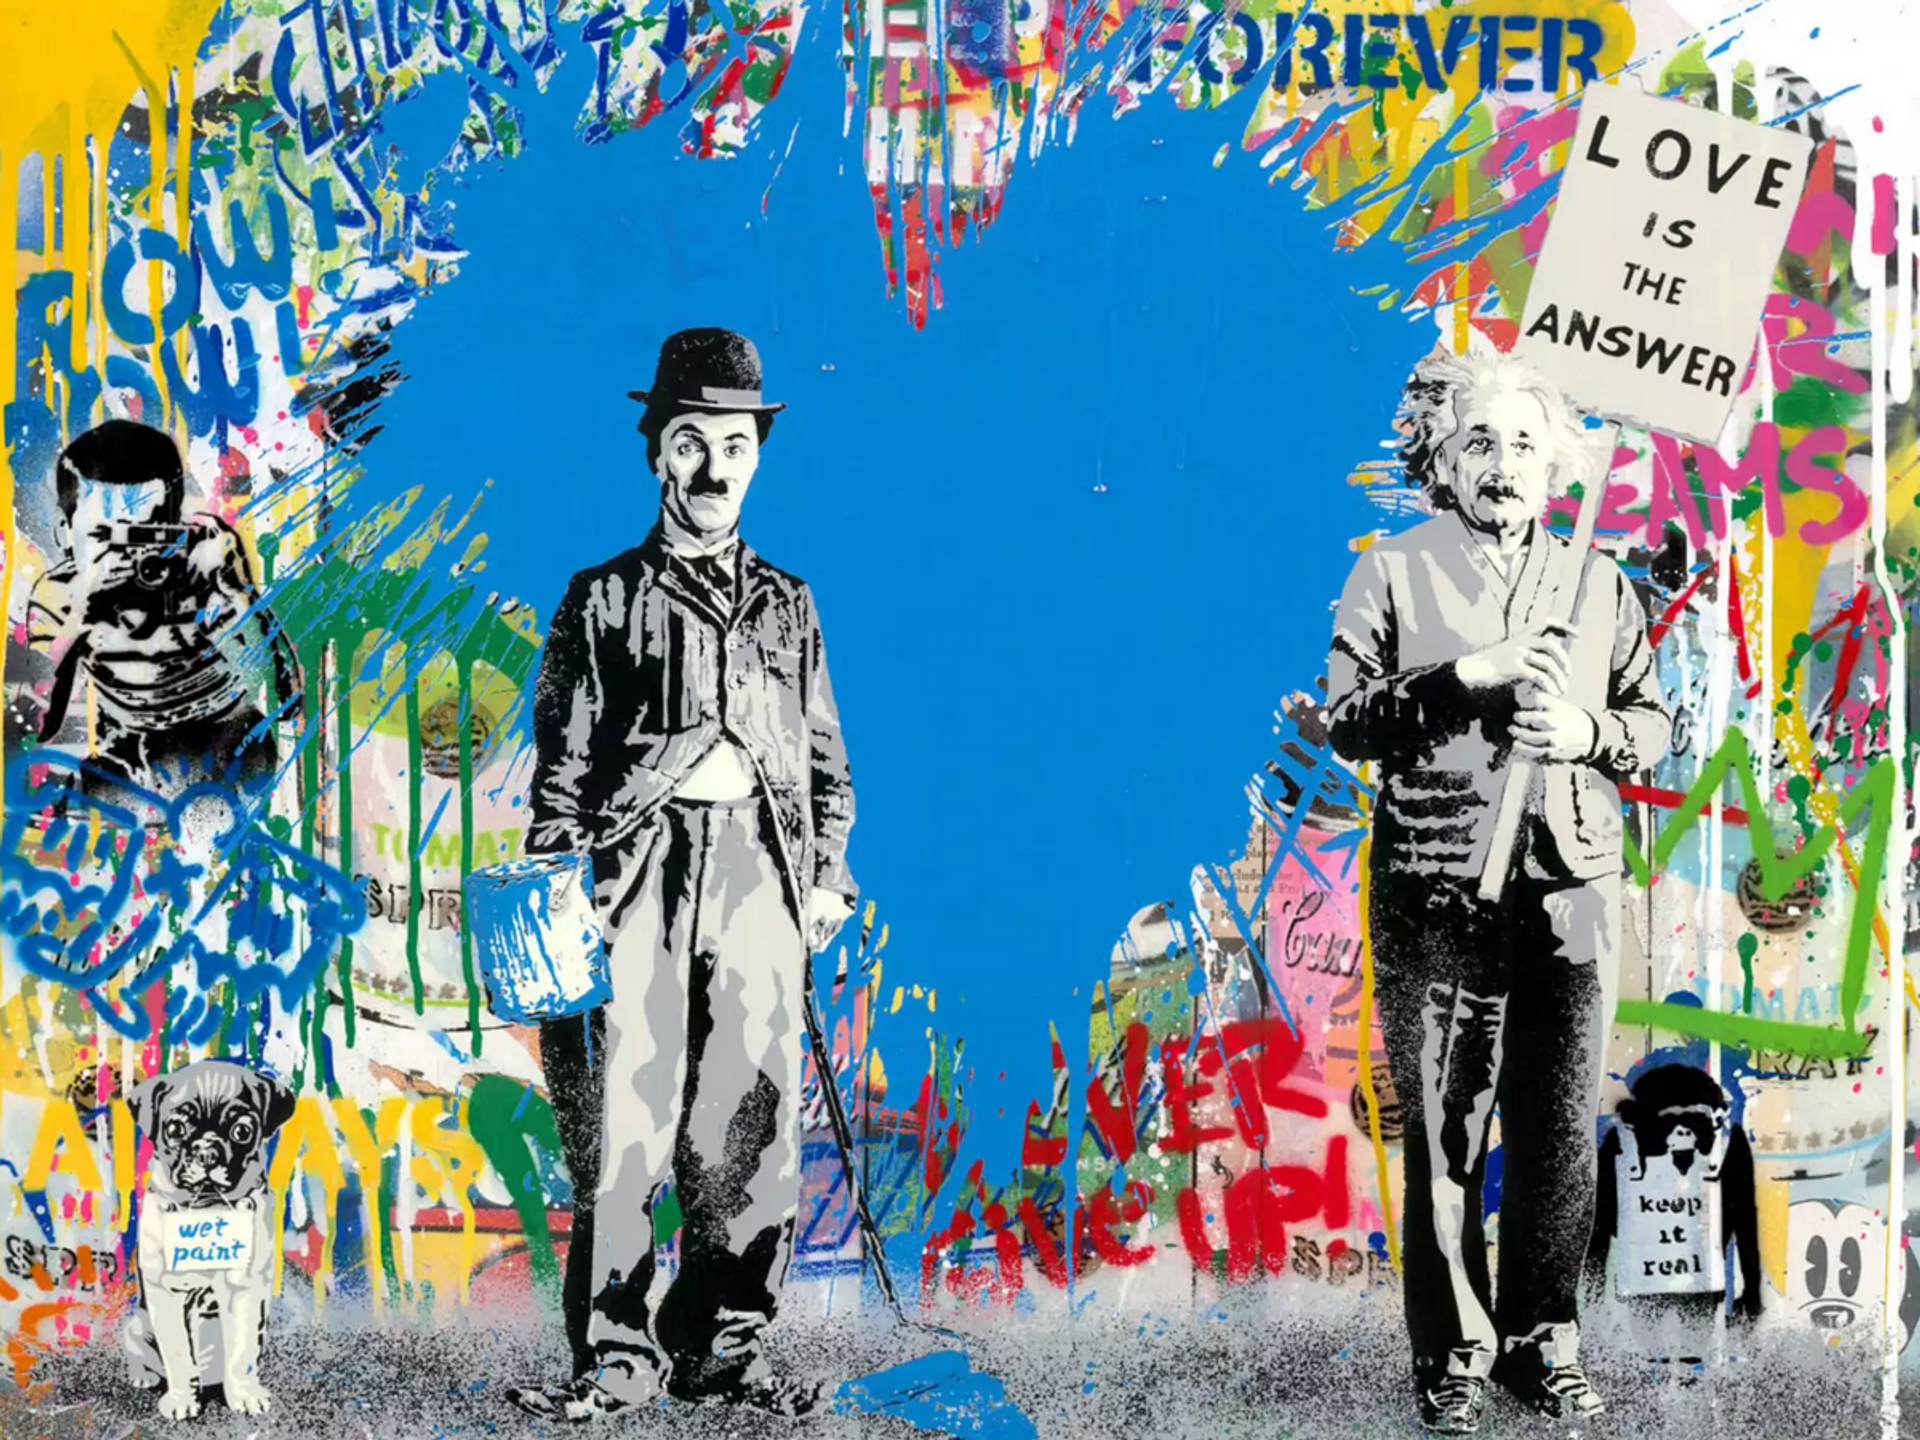 An image of the painting Juxtapose by Mr. Brainwash, featuring a monochrome version of Charlie Chaplin, Albert Einstein, a young boy with a camera, one of Banksy’s Monkeys and a pug against a colourfully splattered background.